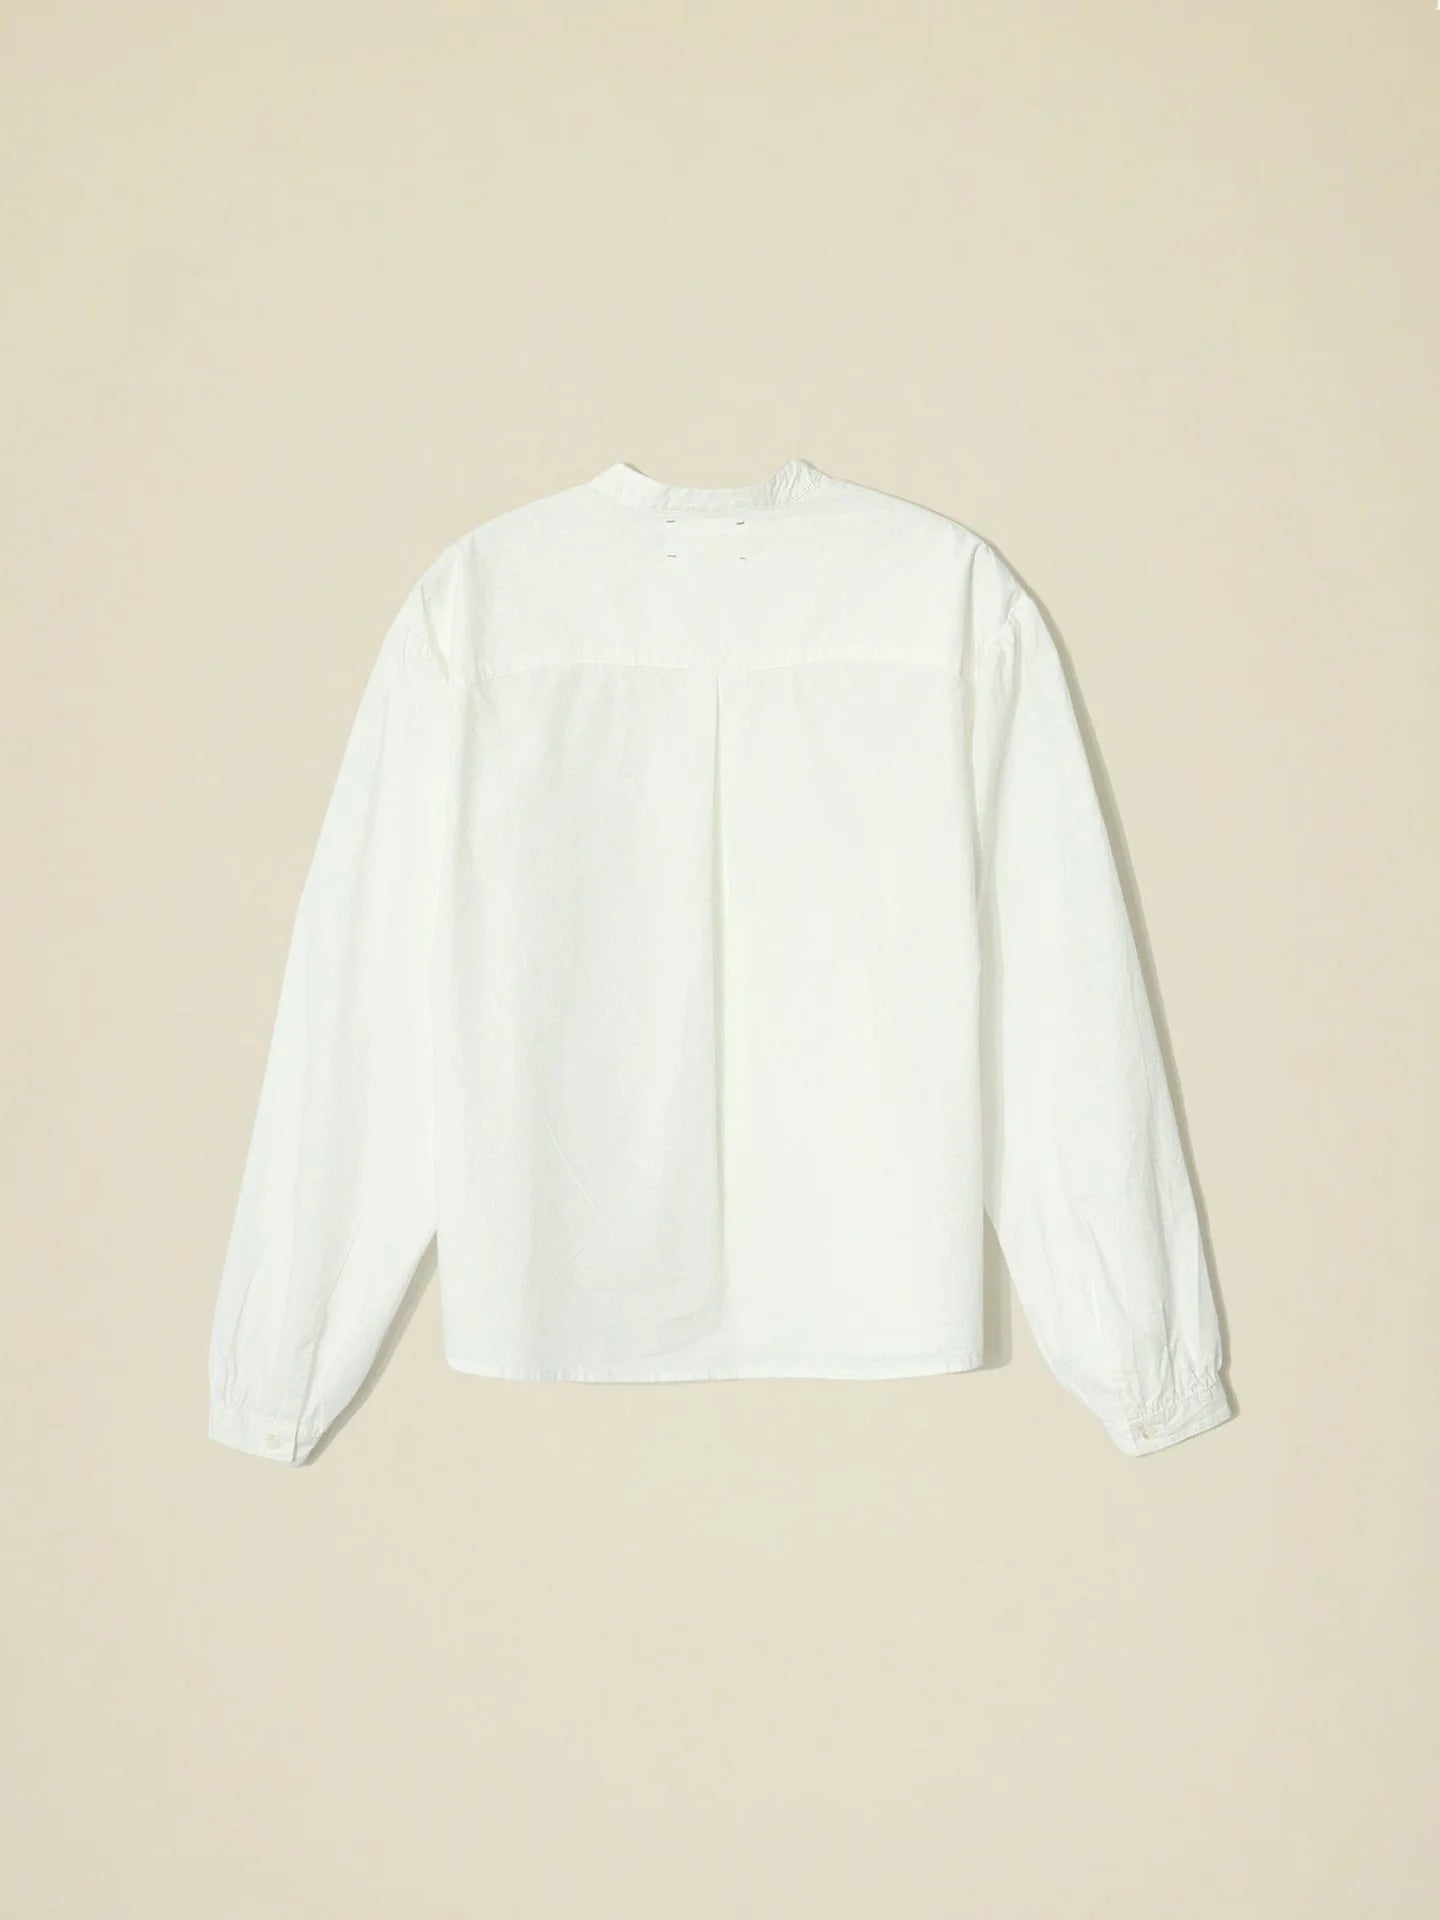 Connolly Shirt in White